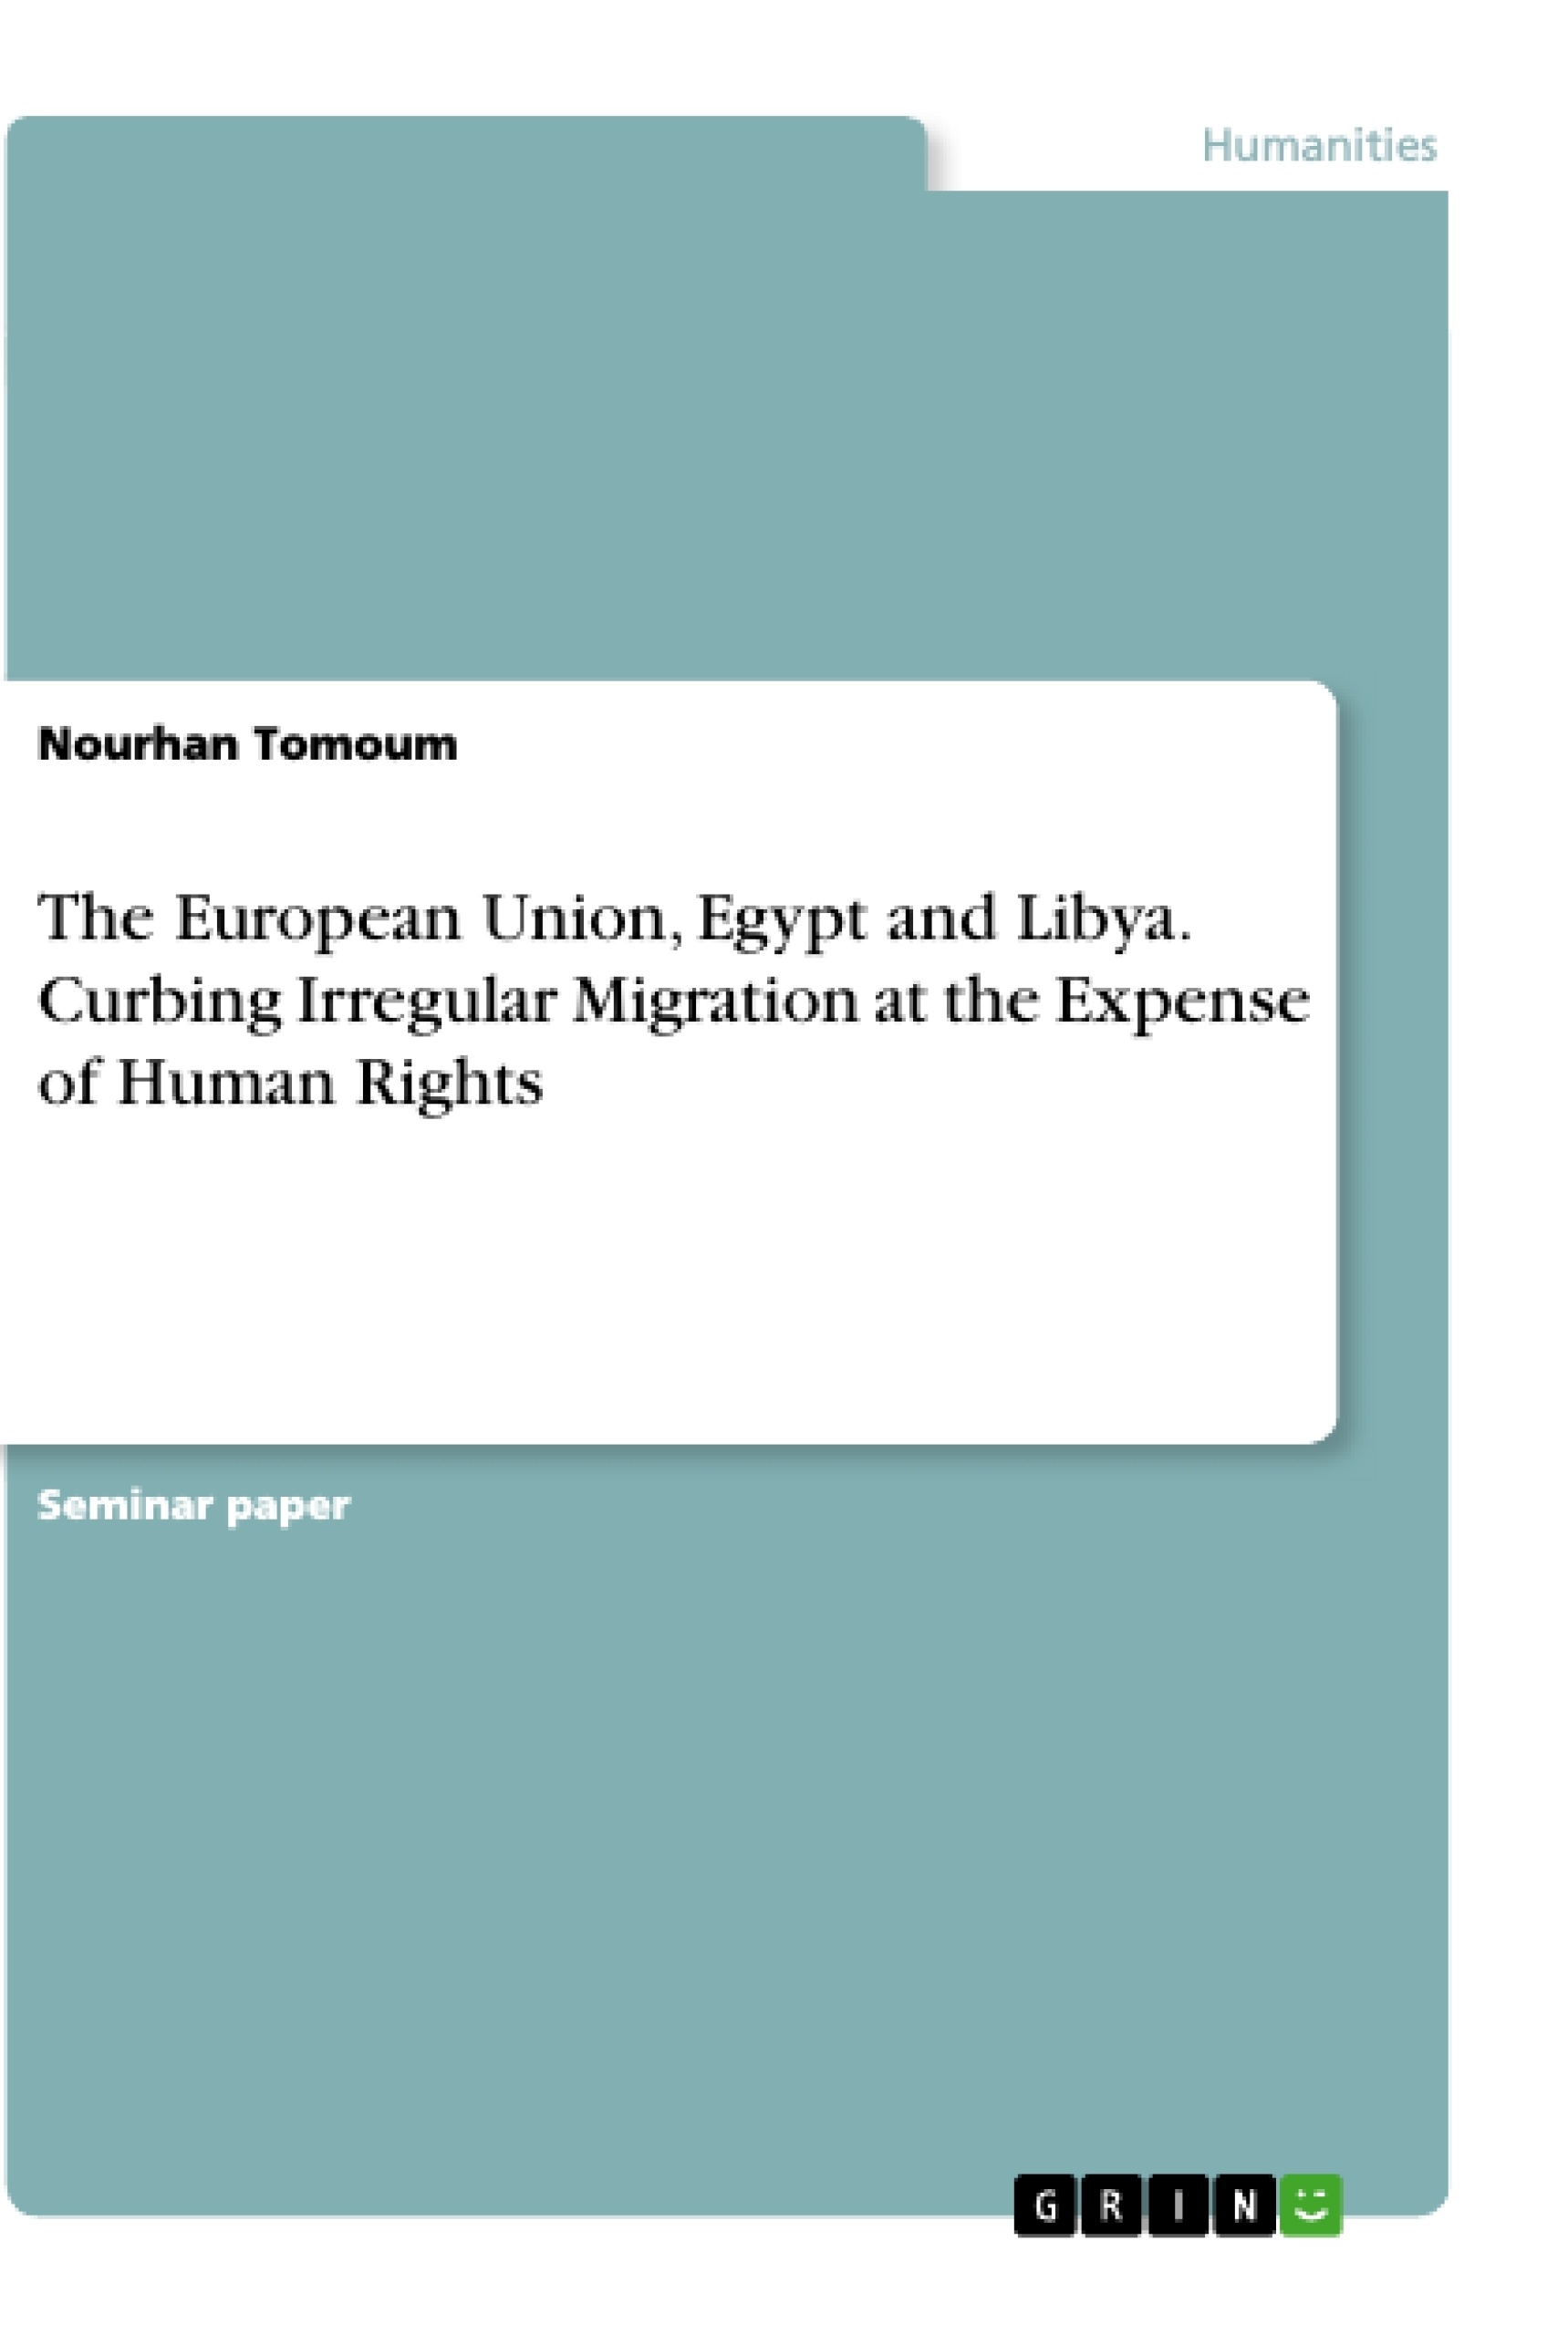 Title: The European Union, Egypt and Libya. Curbing Irregular Migration at the Expense of Human Rights